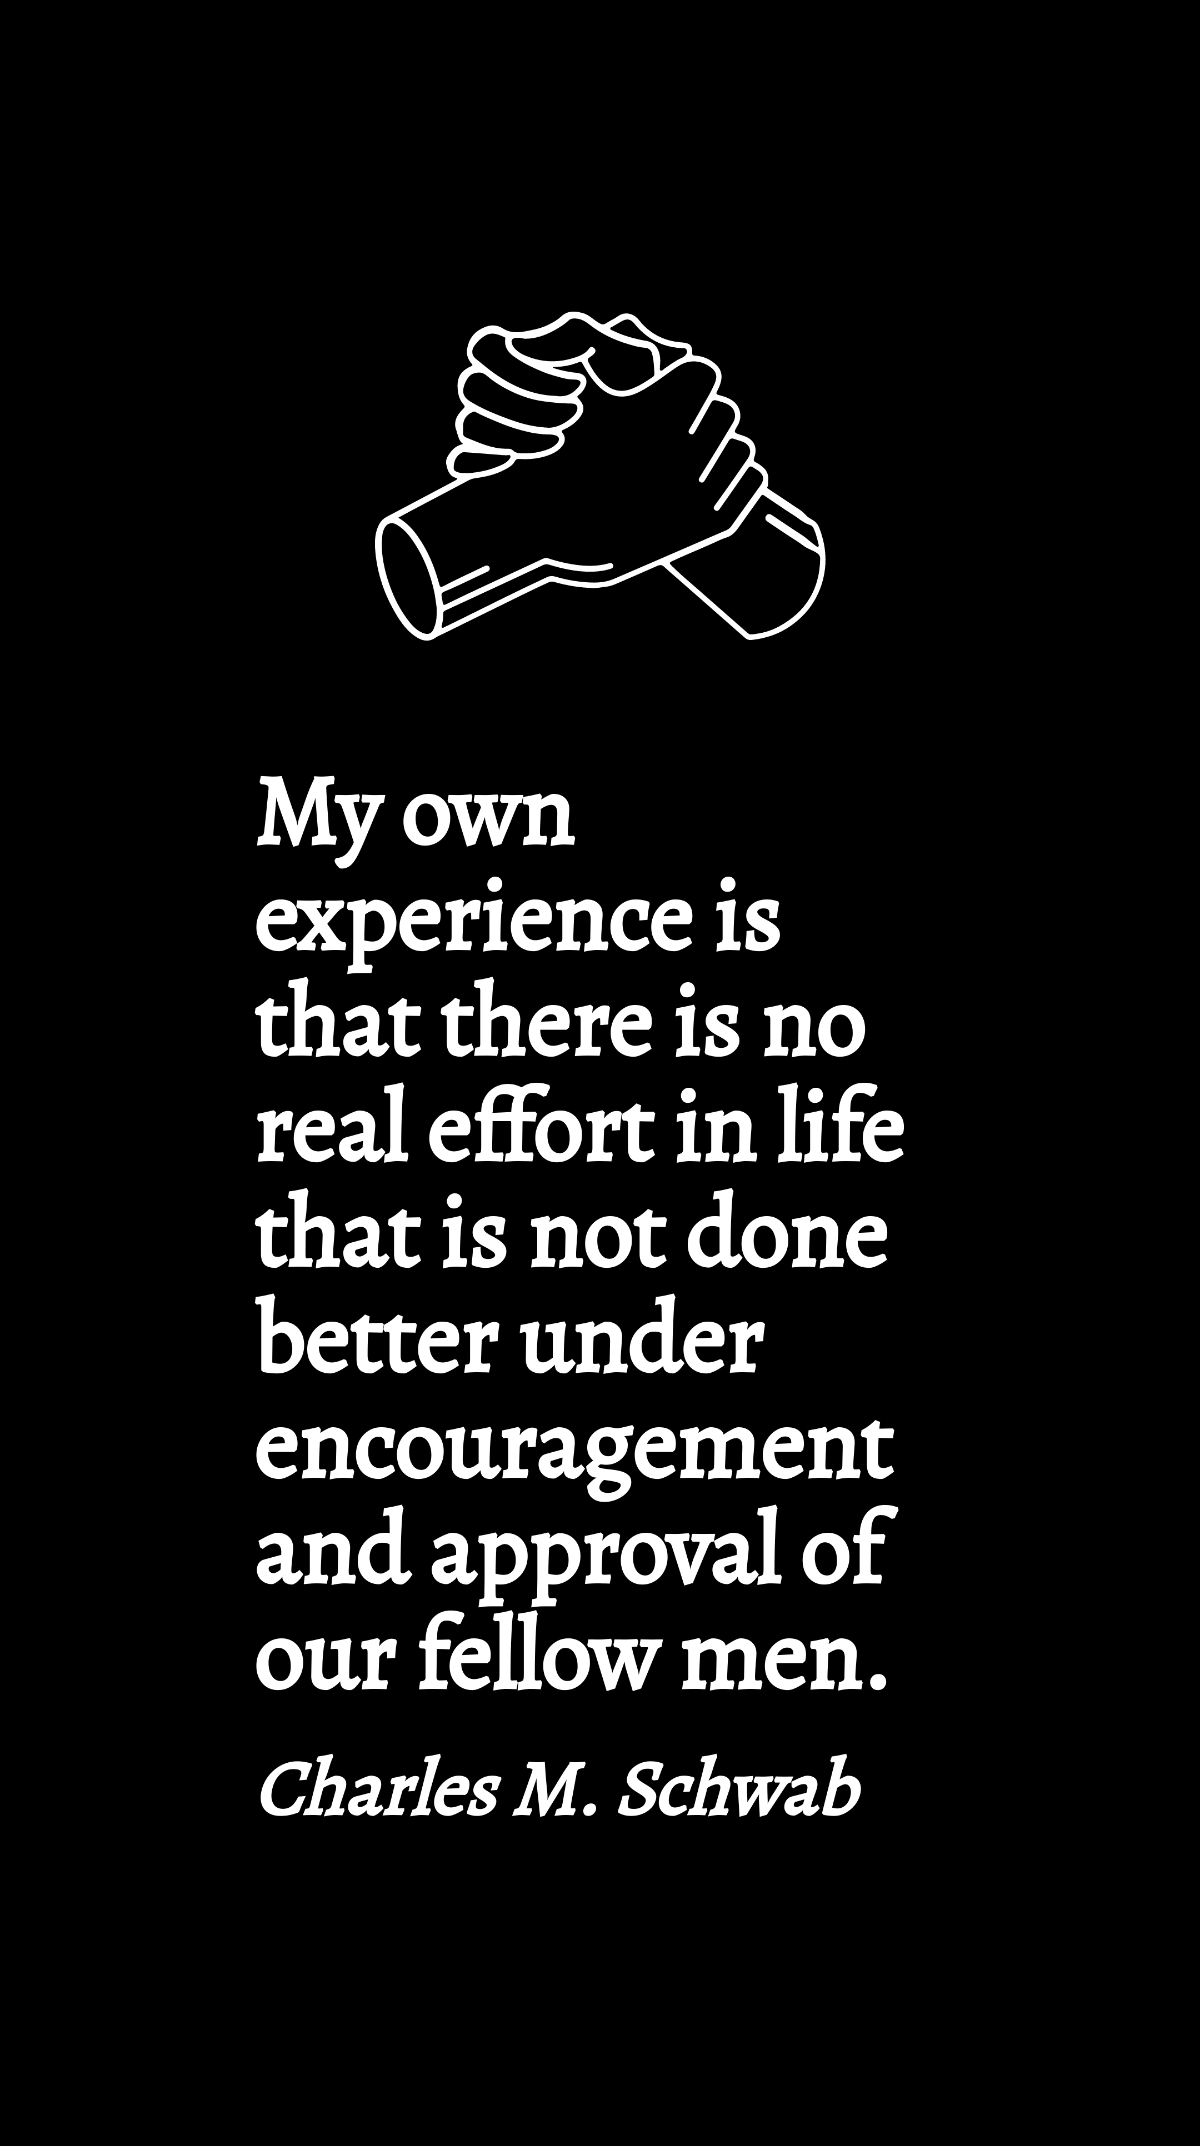 Free Charles M. Schwab - My own experience is that there is no real effort in life that is not done better under encouragement and approval of our fellow men. Template